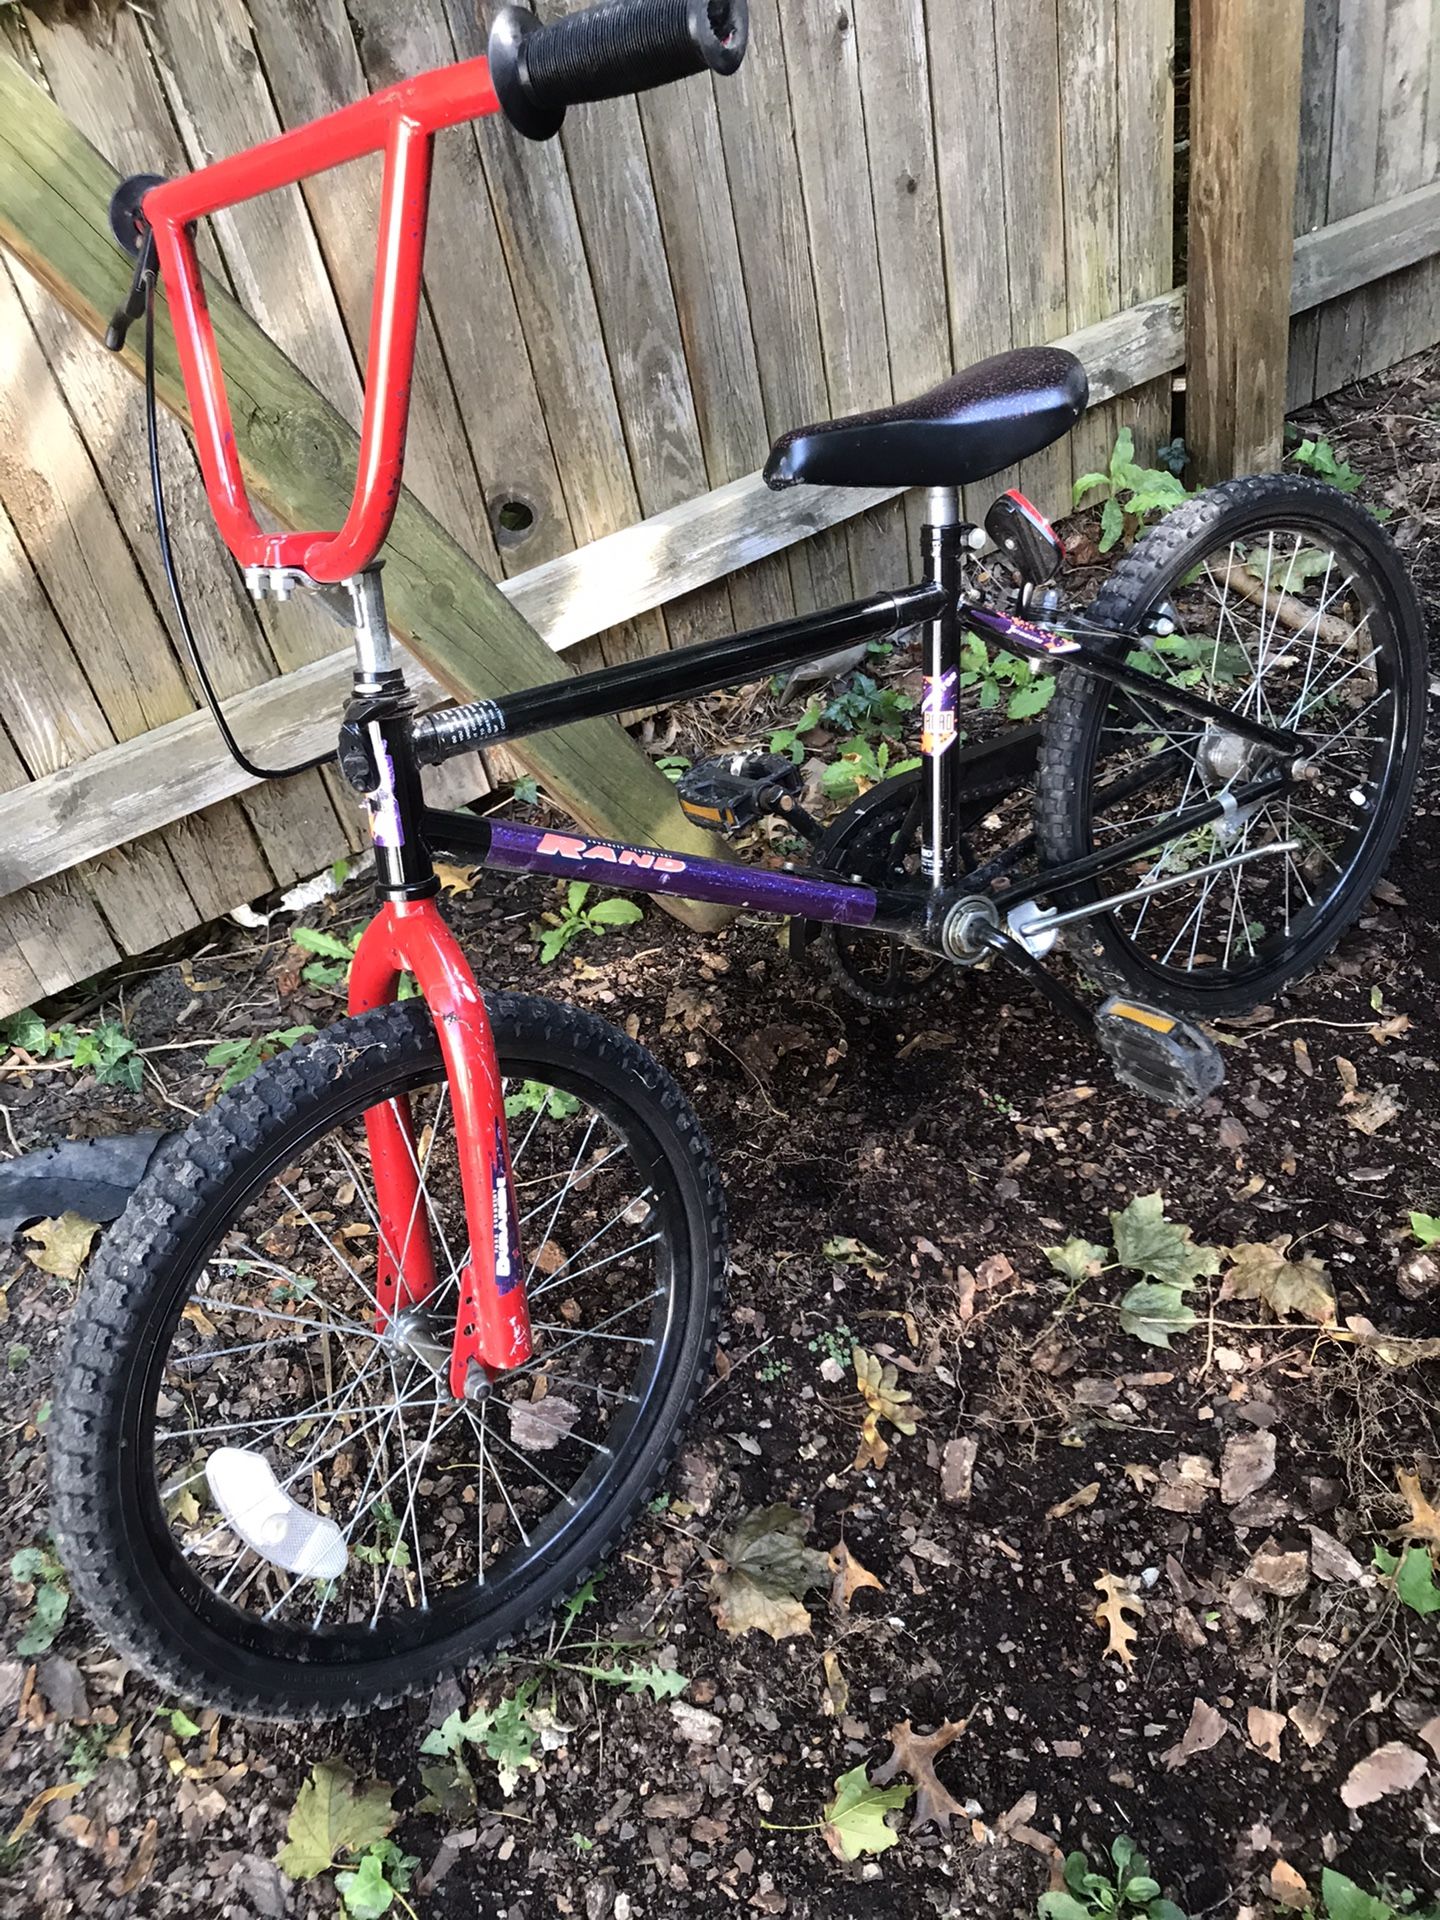 Rand 20” kids mountain bike”Great Condition”I have many bikes on here my prices are the cheapest”